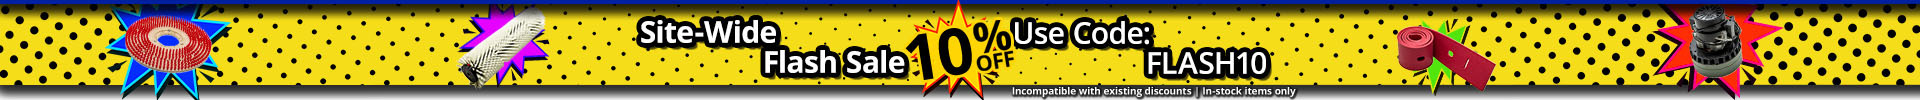 Site-Wide Flash Sale - 10% Off! Use code FLASH10 at checkout. Some exceptions apply. 